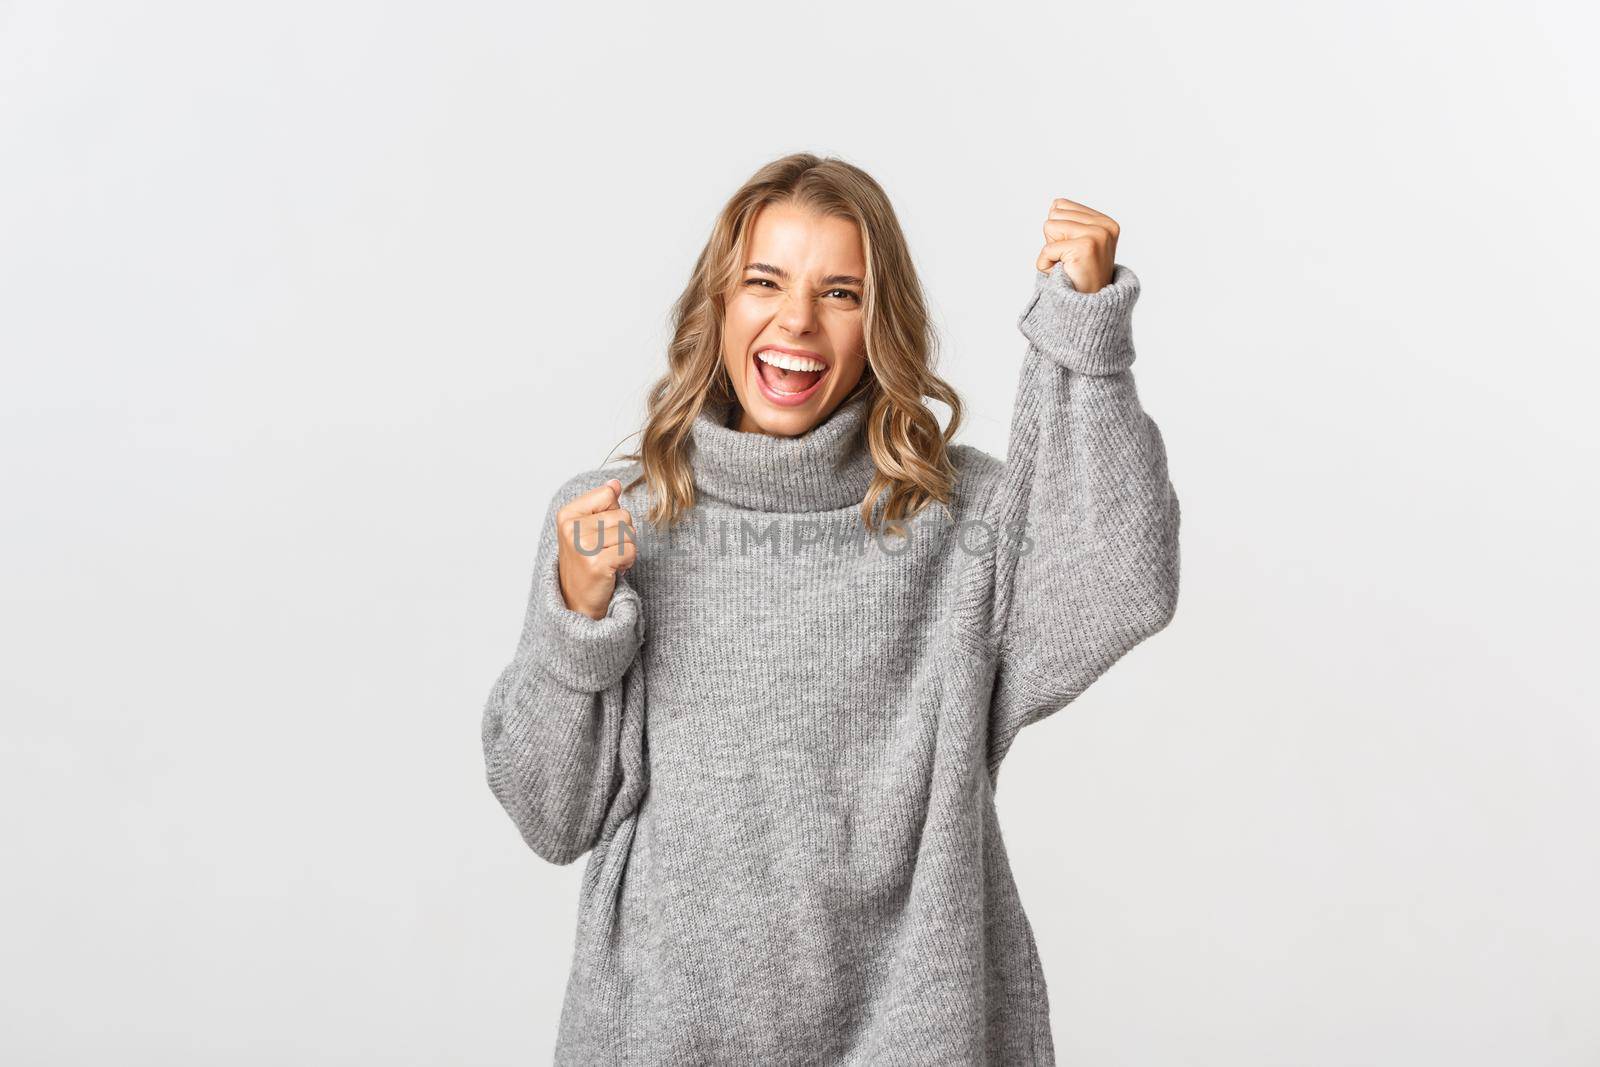 Close-up of excited pretty girl in grey sweater, cheering and rooting for something, screaming for joy, raising hand up and triumphing, standing over white background.